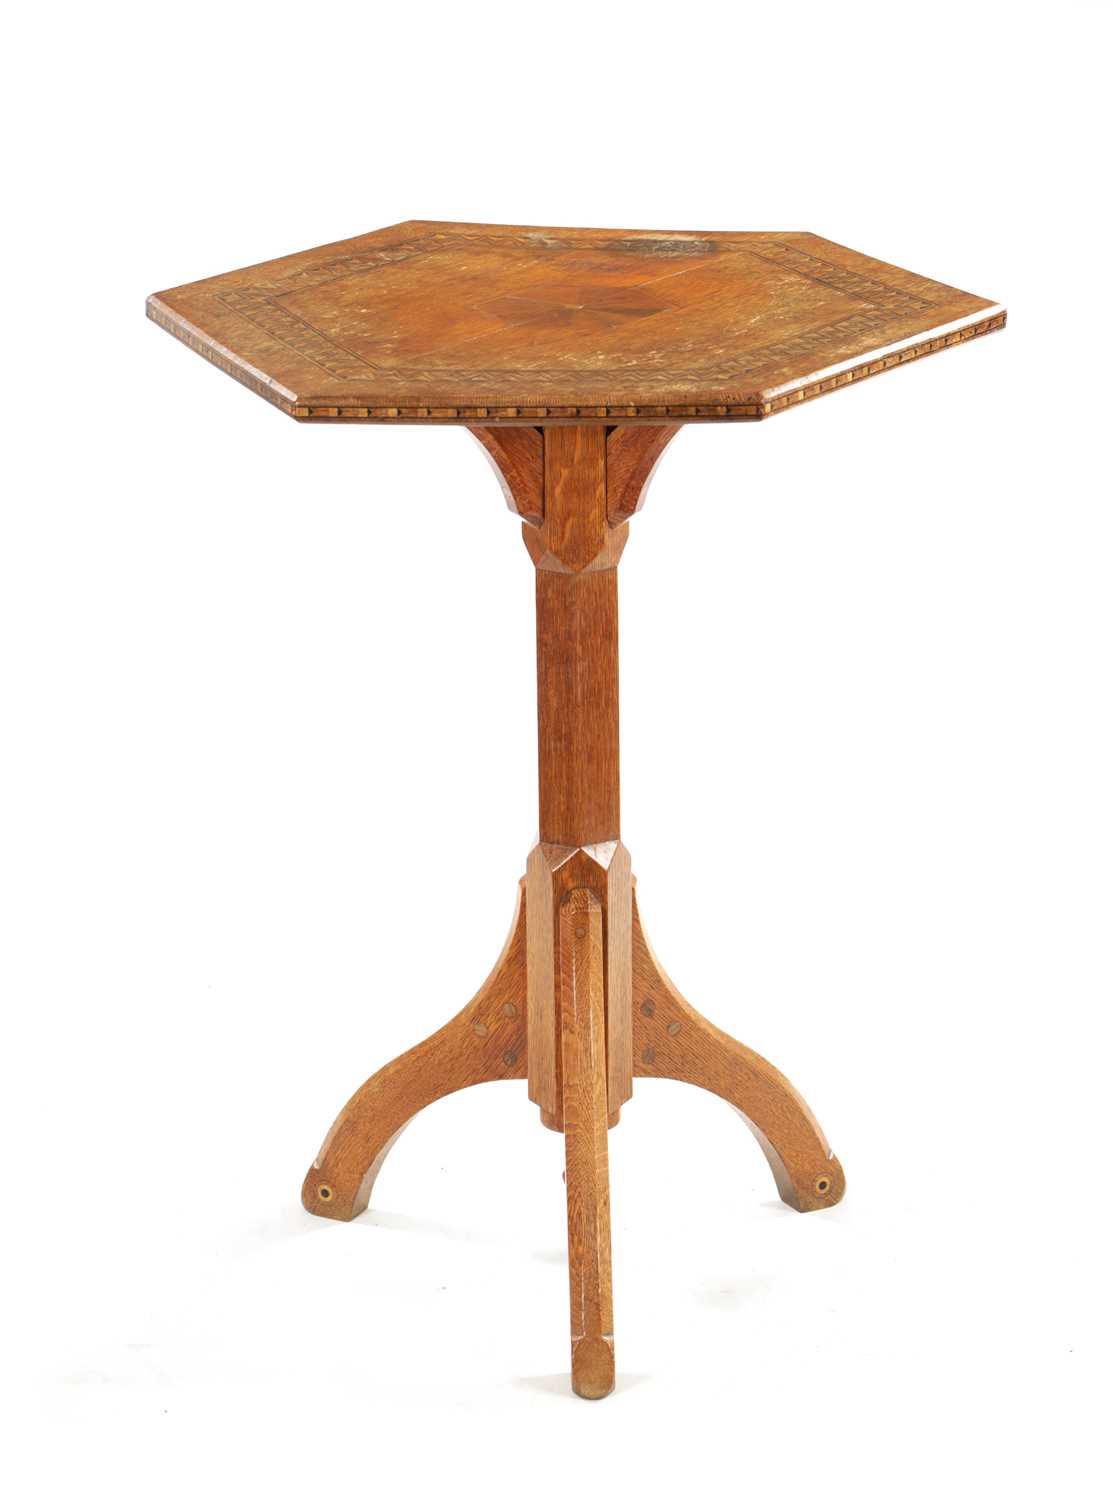 Lot 176 - AN EARLY 20TH CENTURY AESTHETIC PERIOD OCTAGONAL PUGINESQUE INLAID OAK OCCASIONAL TABLE